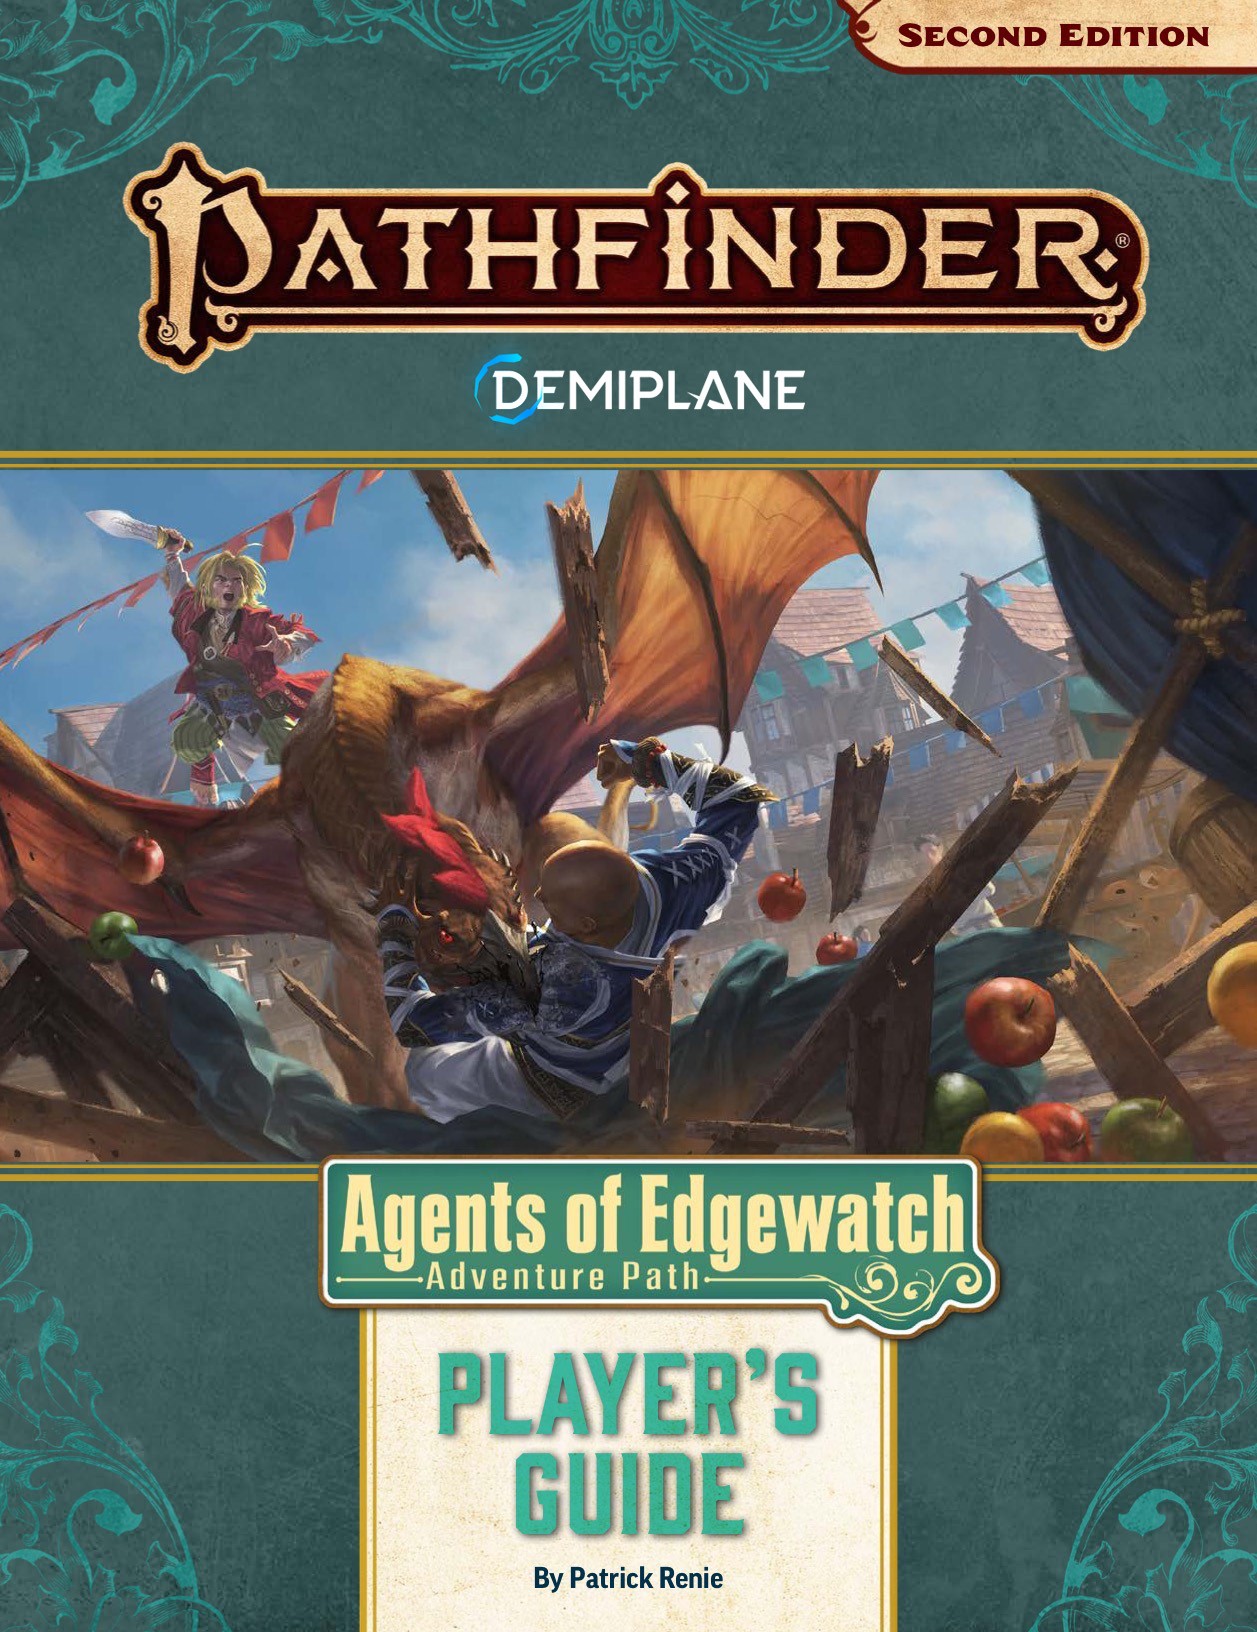 Agents of Edgewatch: Player's Guide